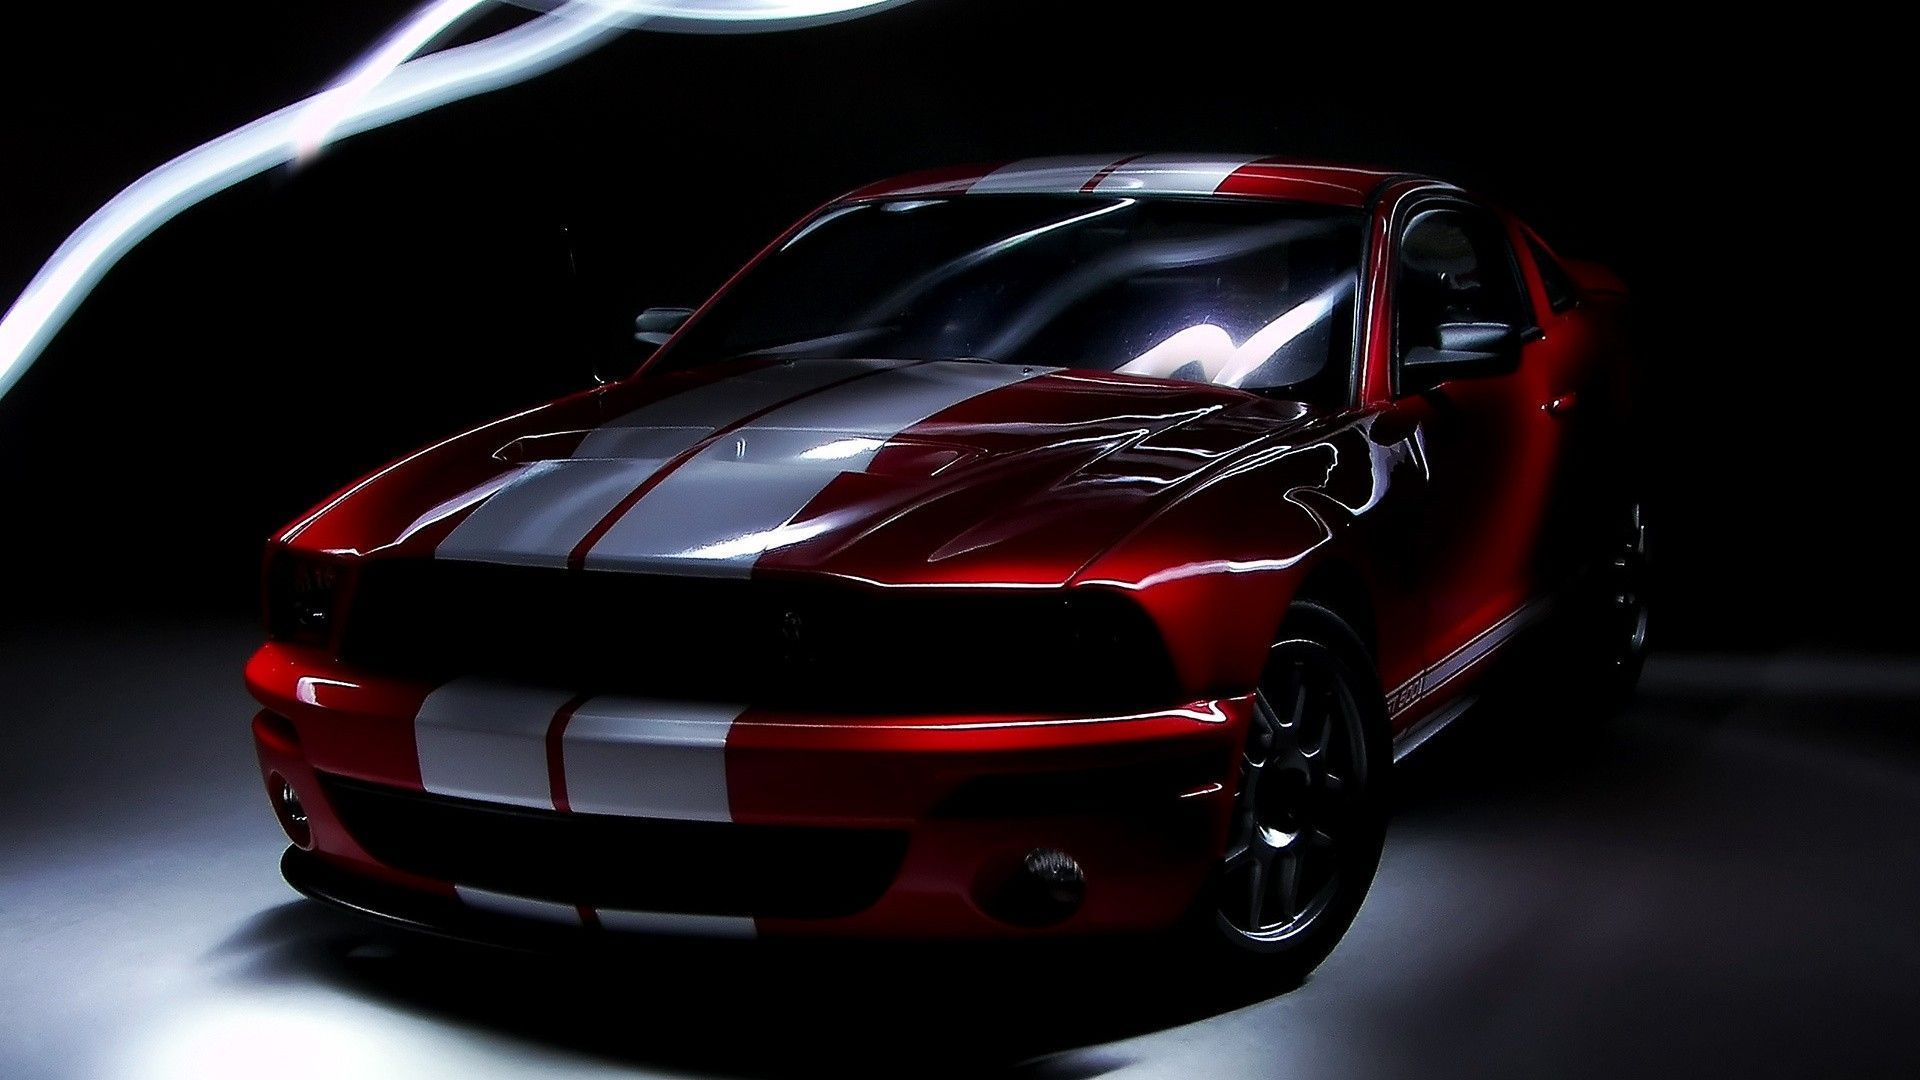 Super Ford Mustang Shelby Wallpaper Full HD Pictures